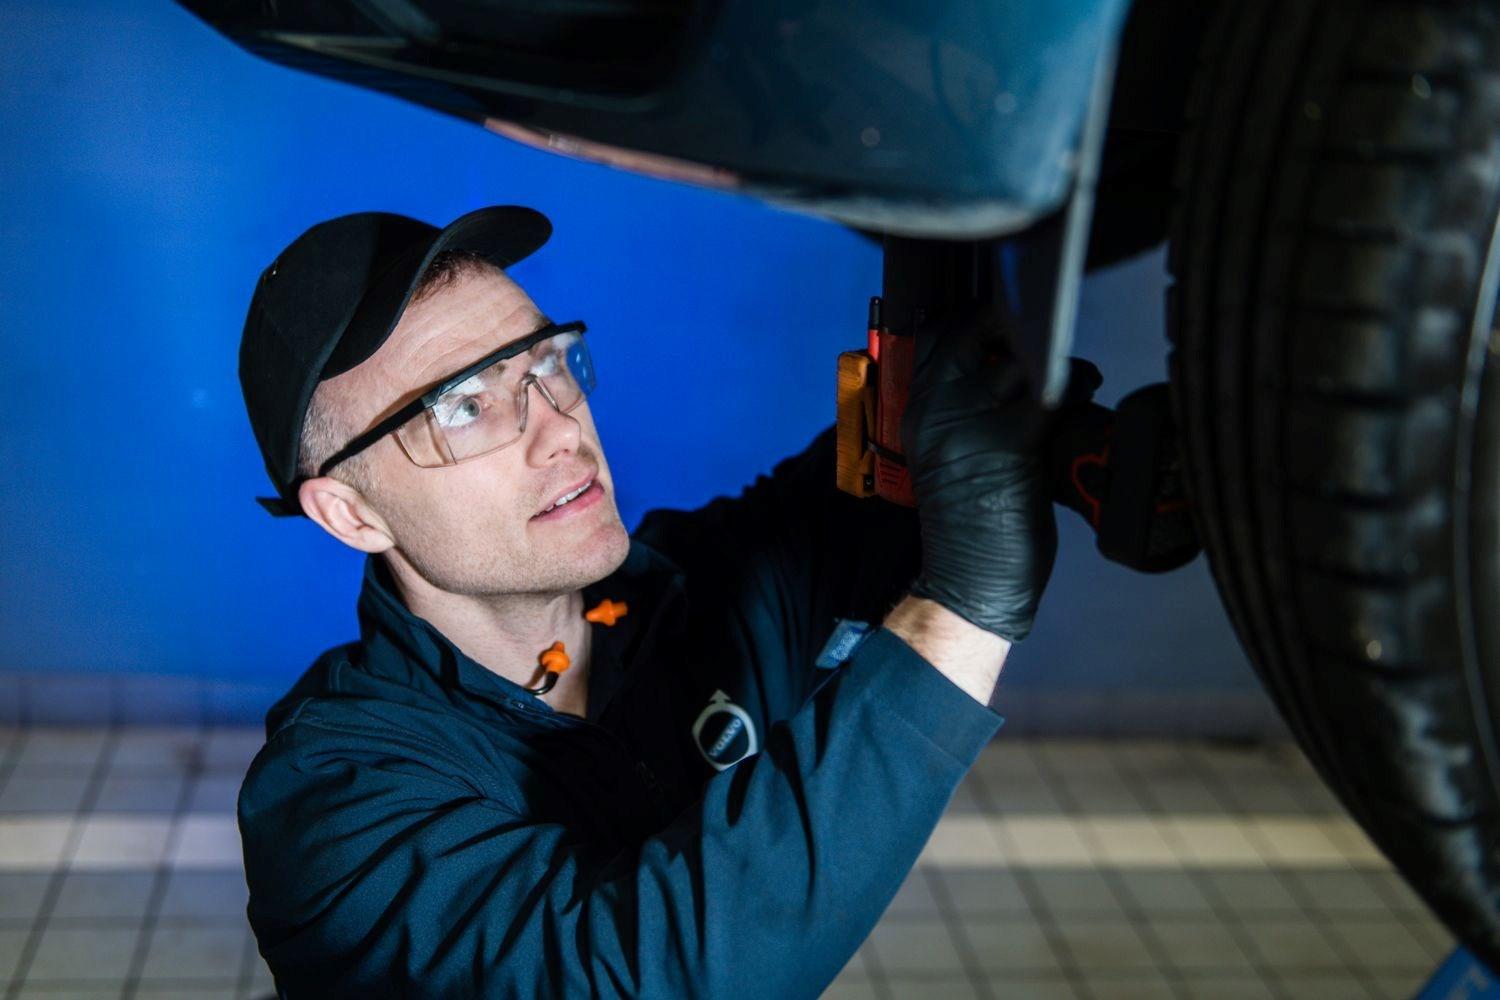 Agnew Belfast Volvo mechanic takes a closer look by inspecting used car with handheld light for damage to repair